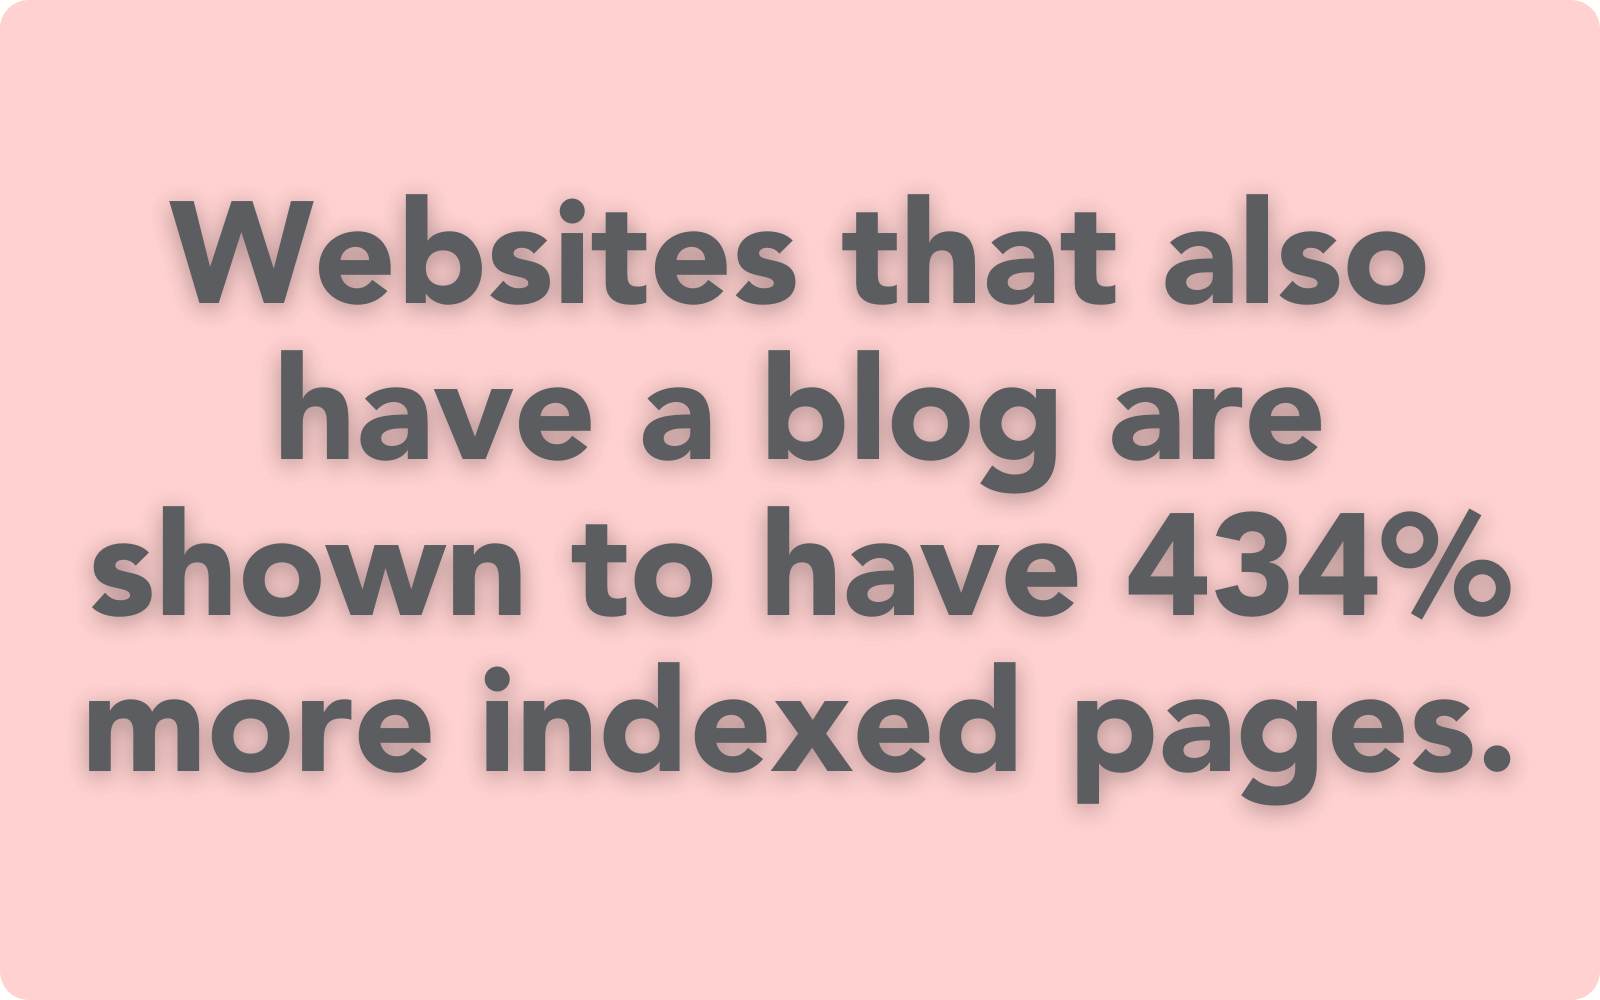 websites that also have a blog are shown to have 434% more indexed pages